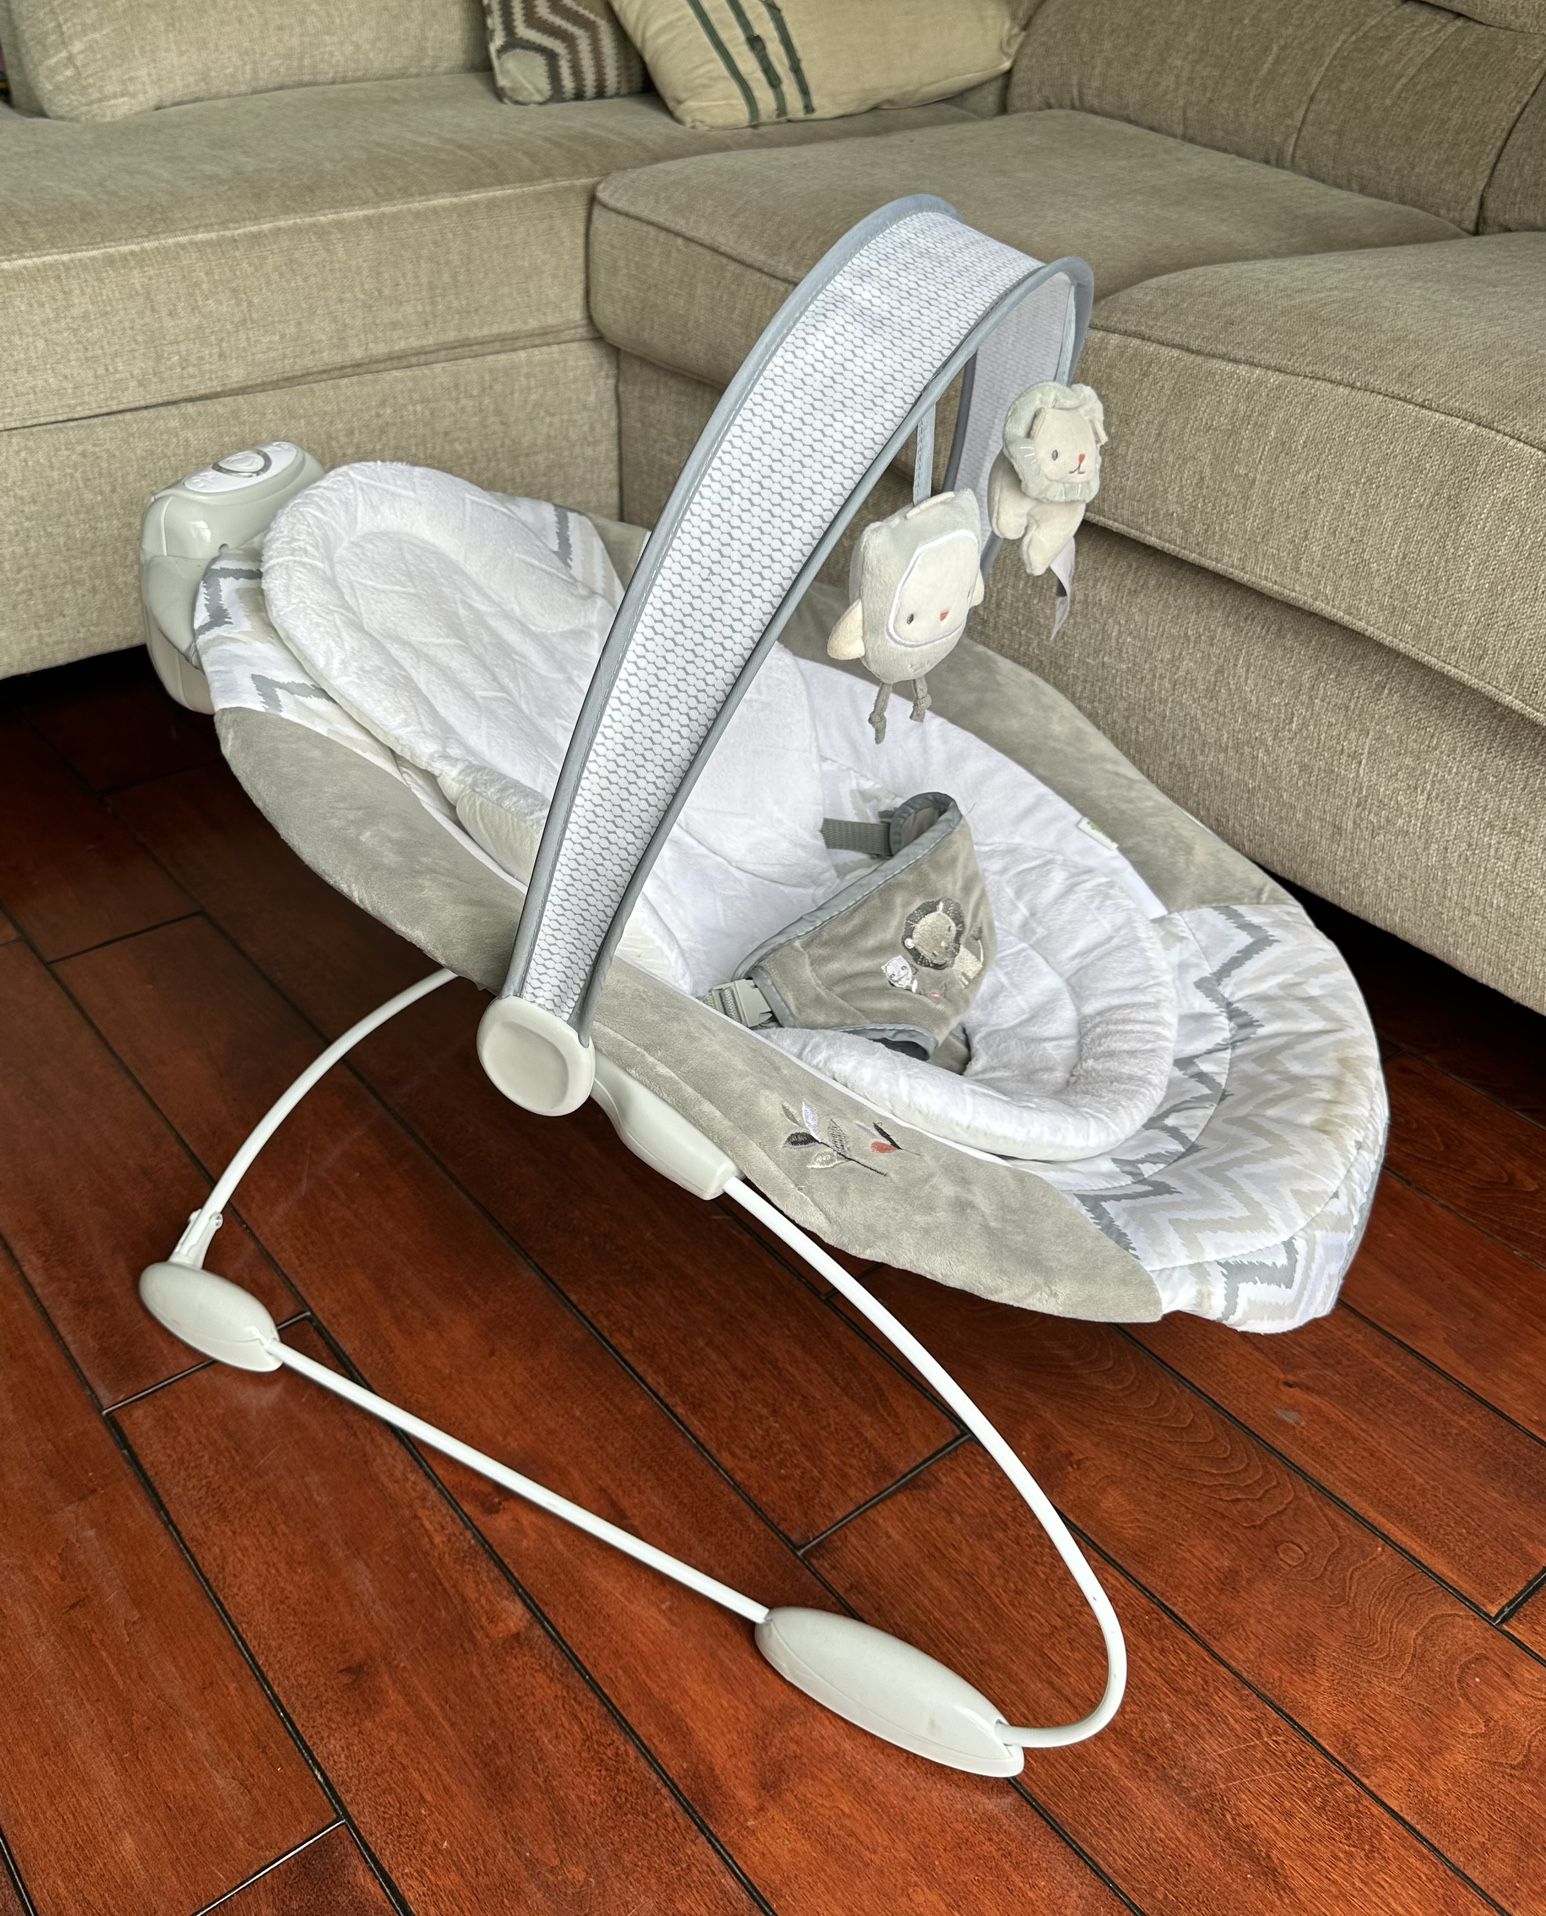 Ingenuity SmartBounce Automatic Baby Bouncer Seat with Music & Nature Sounds - Braden